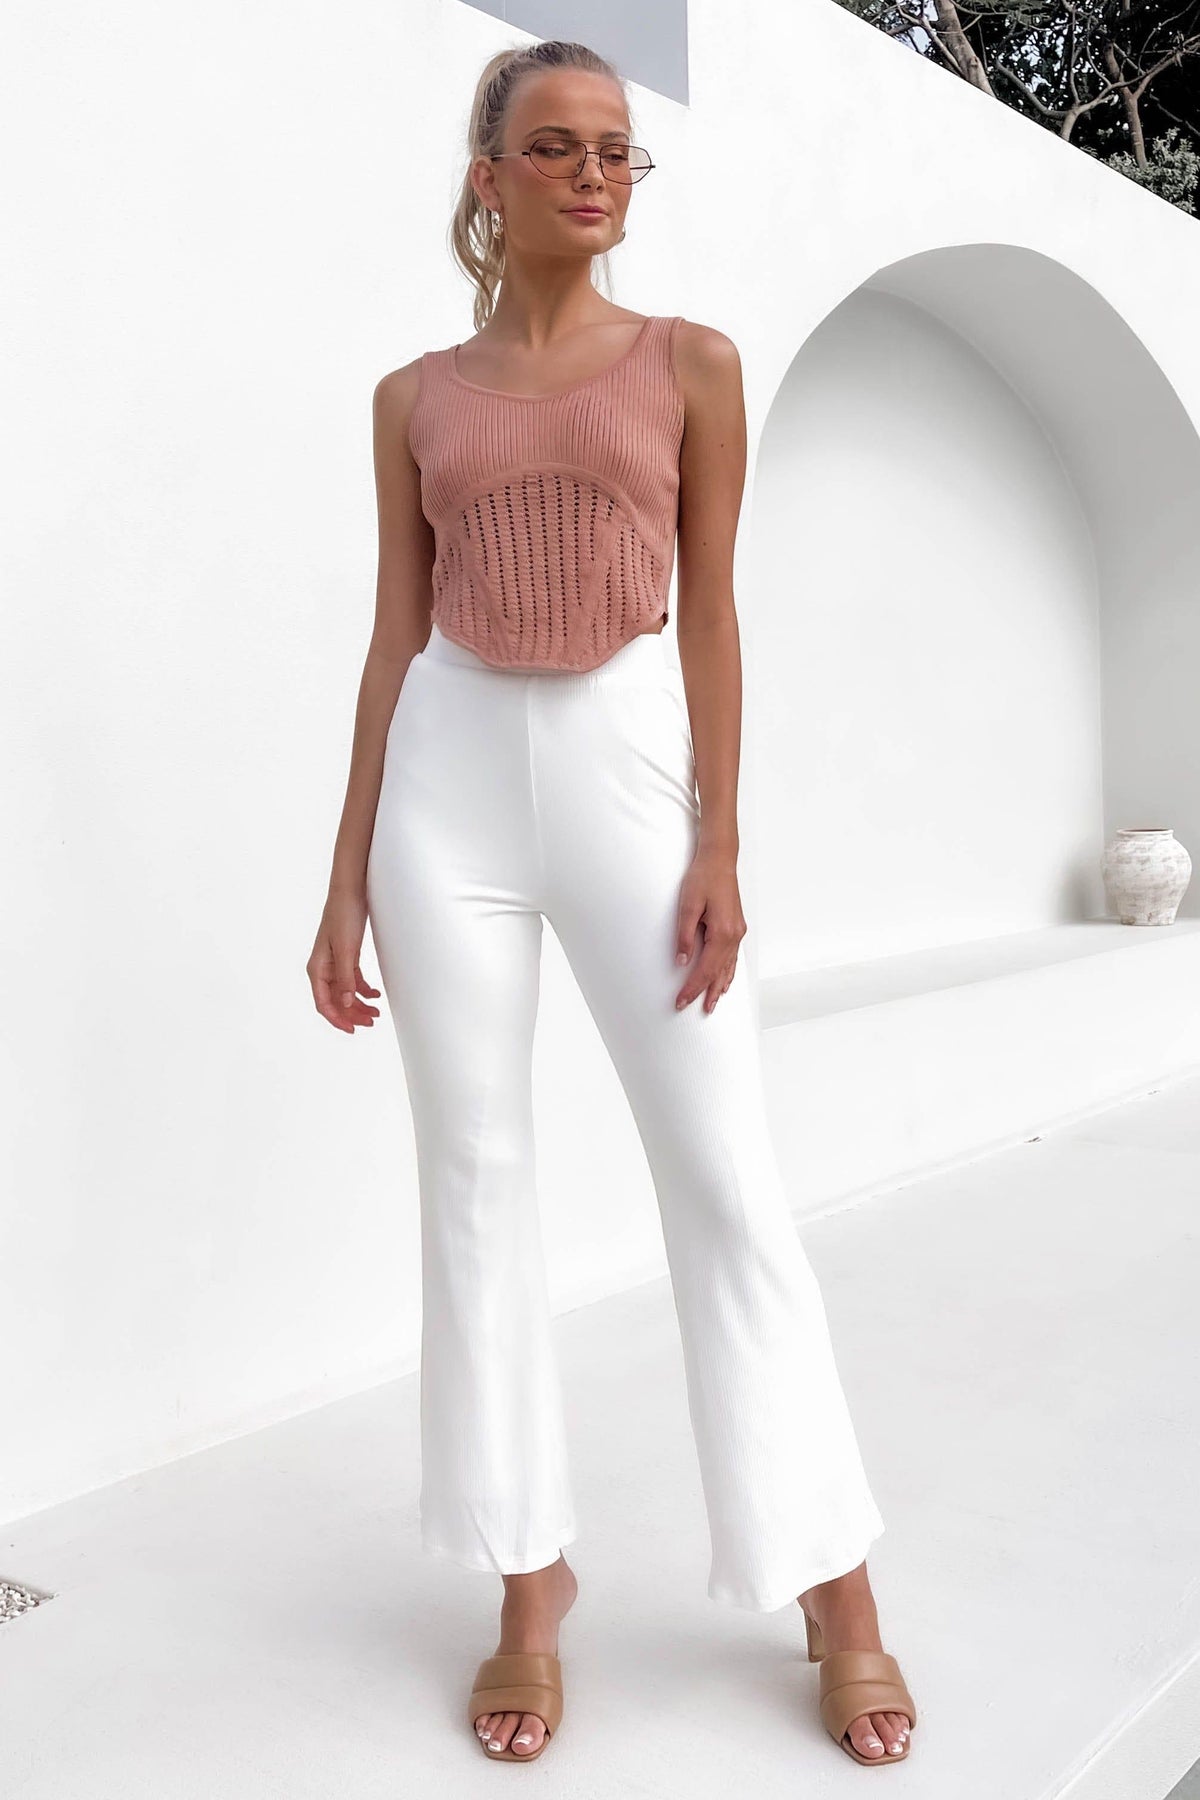 Mantra Top, BASIC TOPS, BASICS, BROWN, CROP TOPS, NEW ARRIVALS, POLYESTER, TOP, TOPS, , -MISHKAH